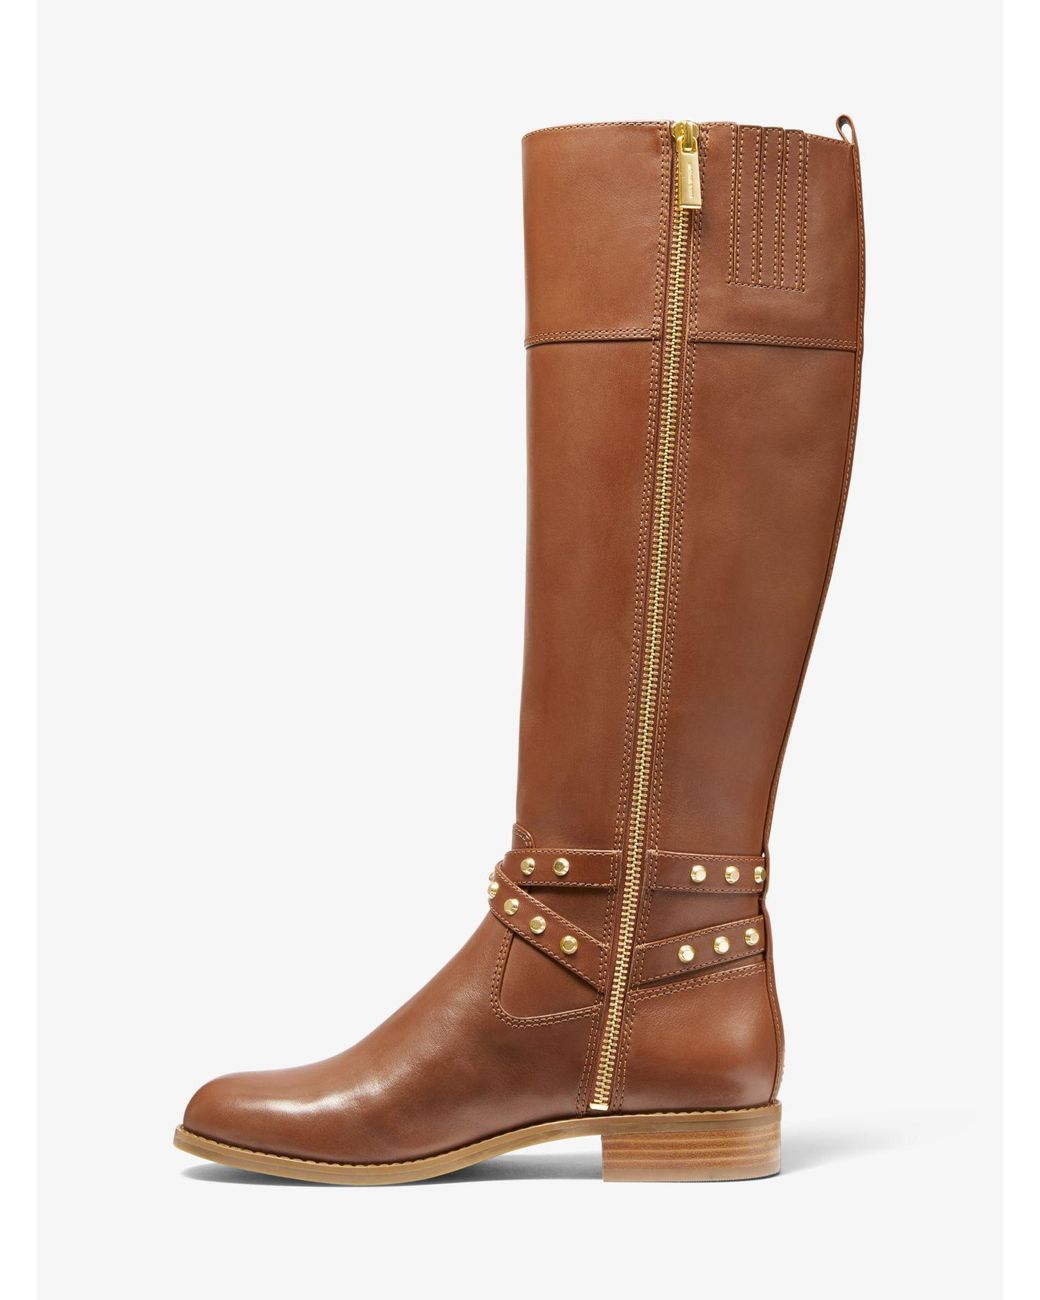 Michael Kors Preston Studded Leather Boot in Chestnut (Brown) | Lyst